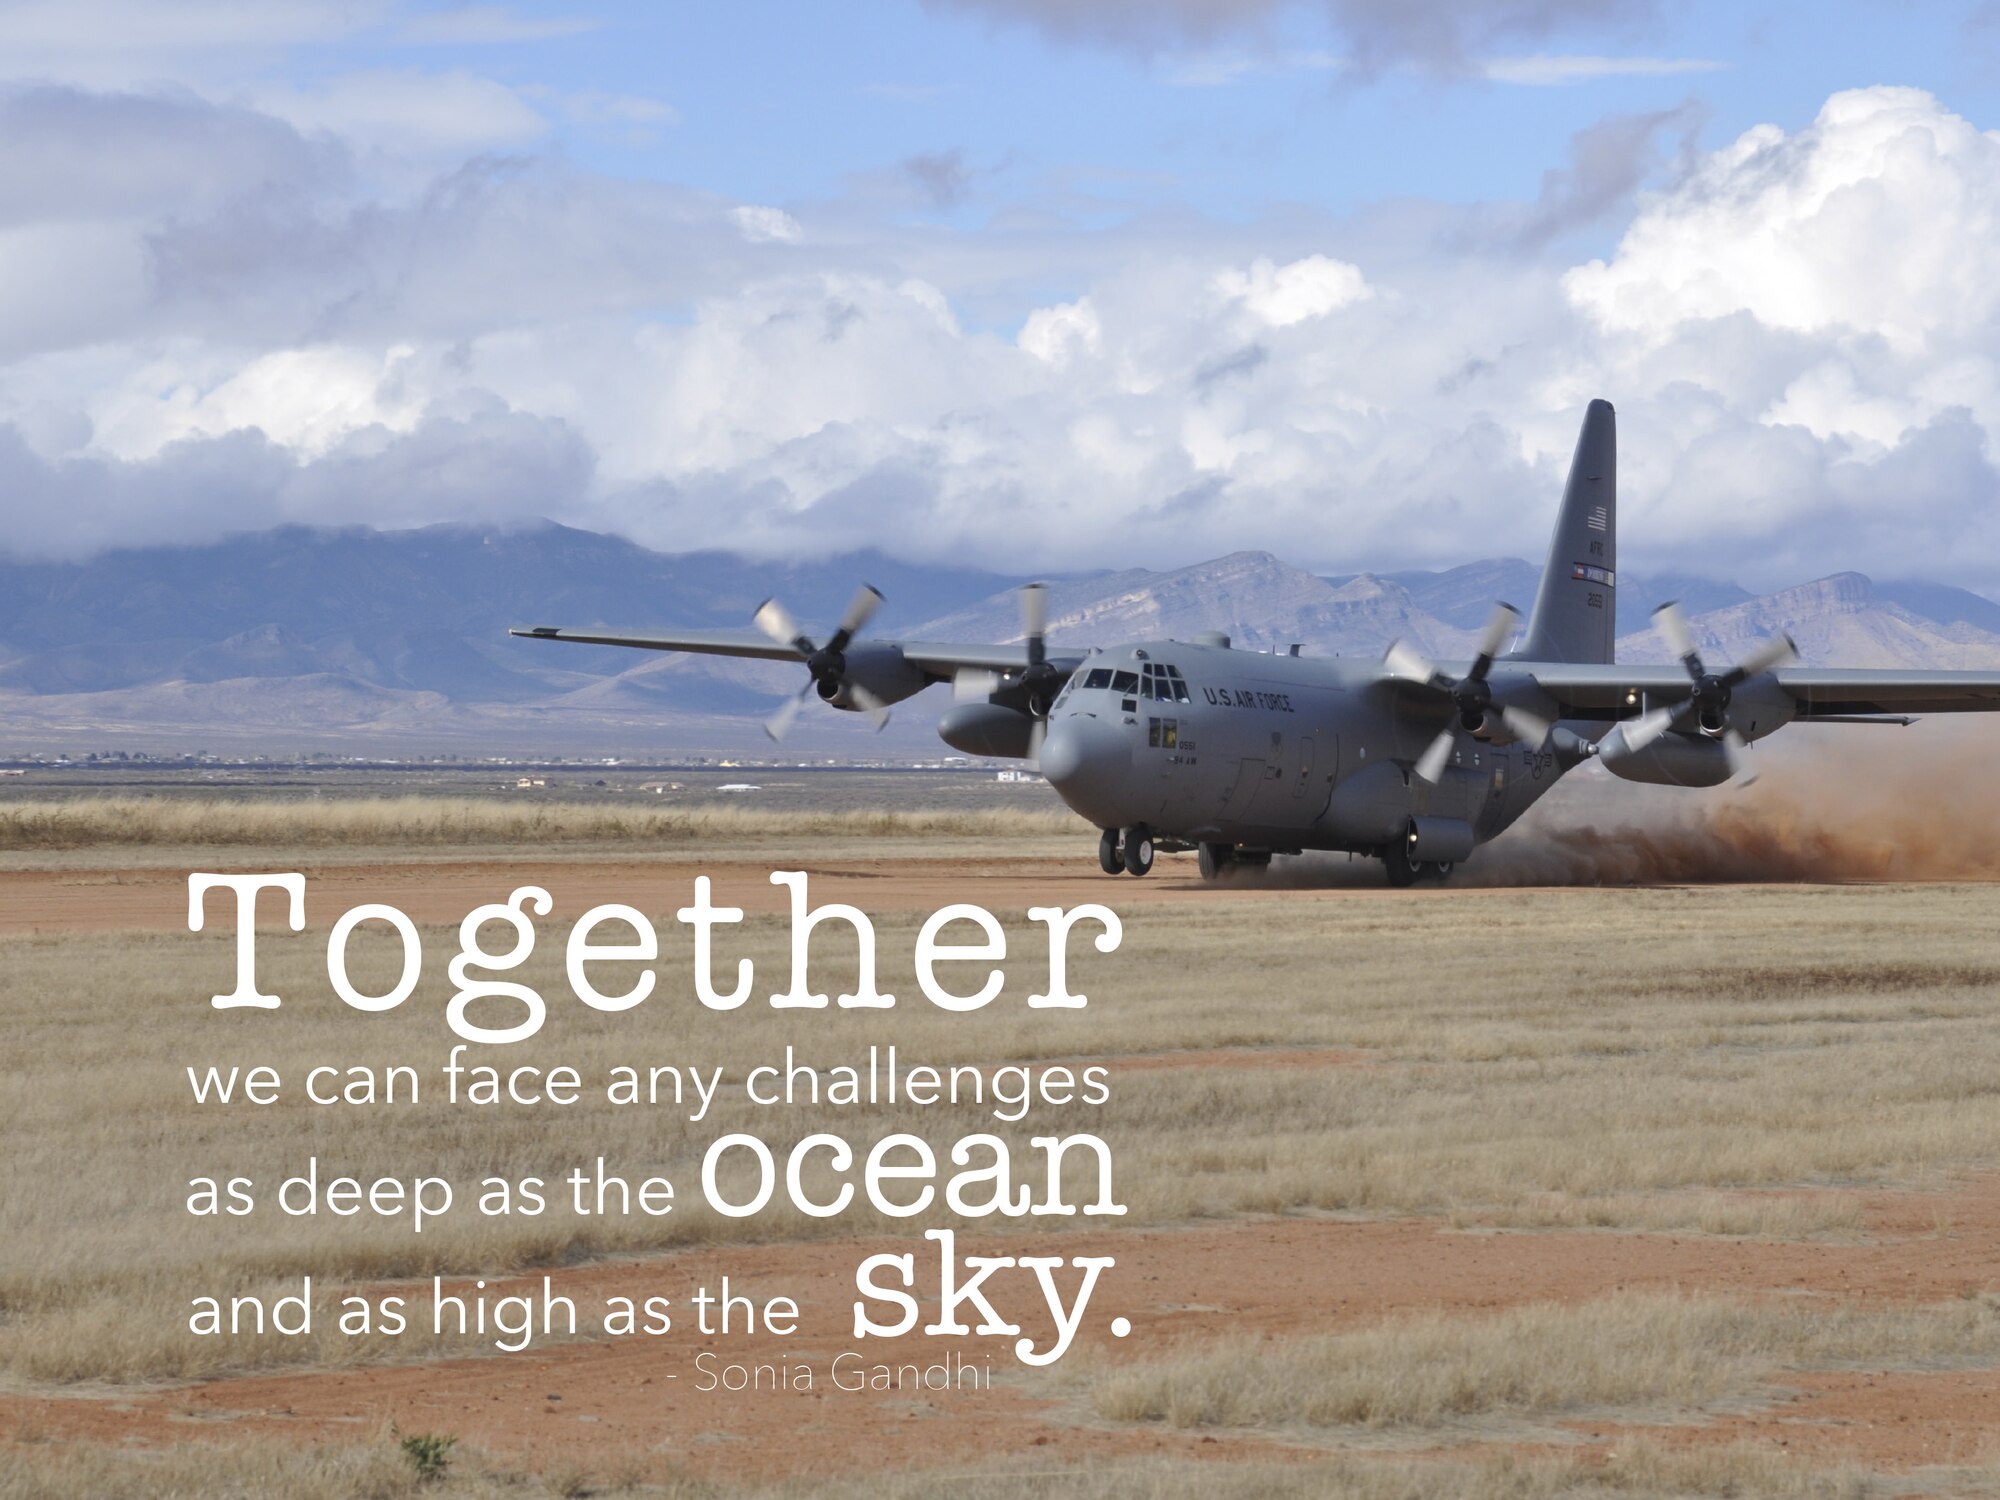 This week's motivation is from Sonia Gandhi, an Indian politician and the world's 9th most powerful woman according to Forbes magazine.

"Together we can face any challenges as deep as the ocean and as high as the sky."

(U.S. Air Force graphic/Tech. Sgt. Andrew Park)